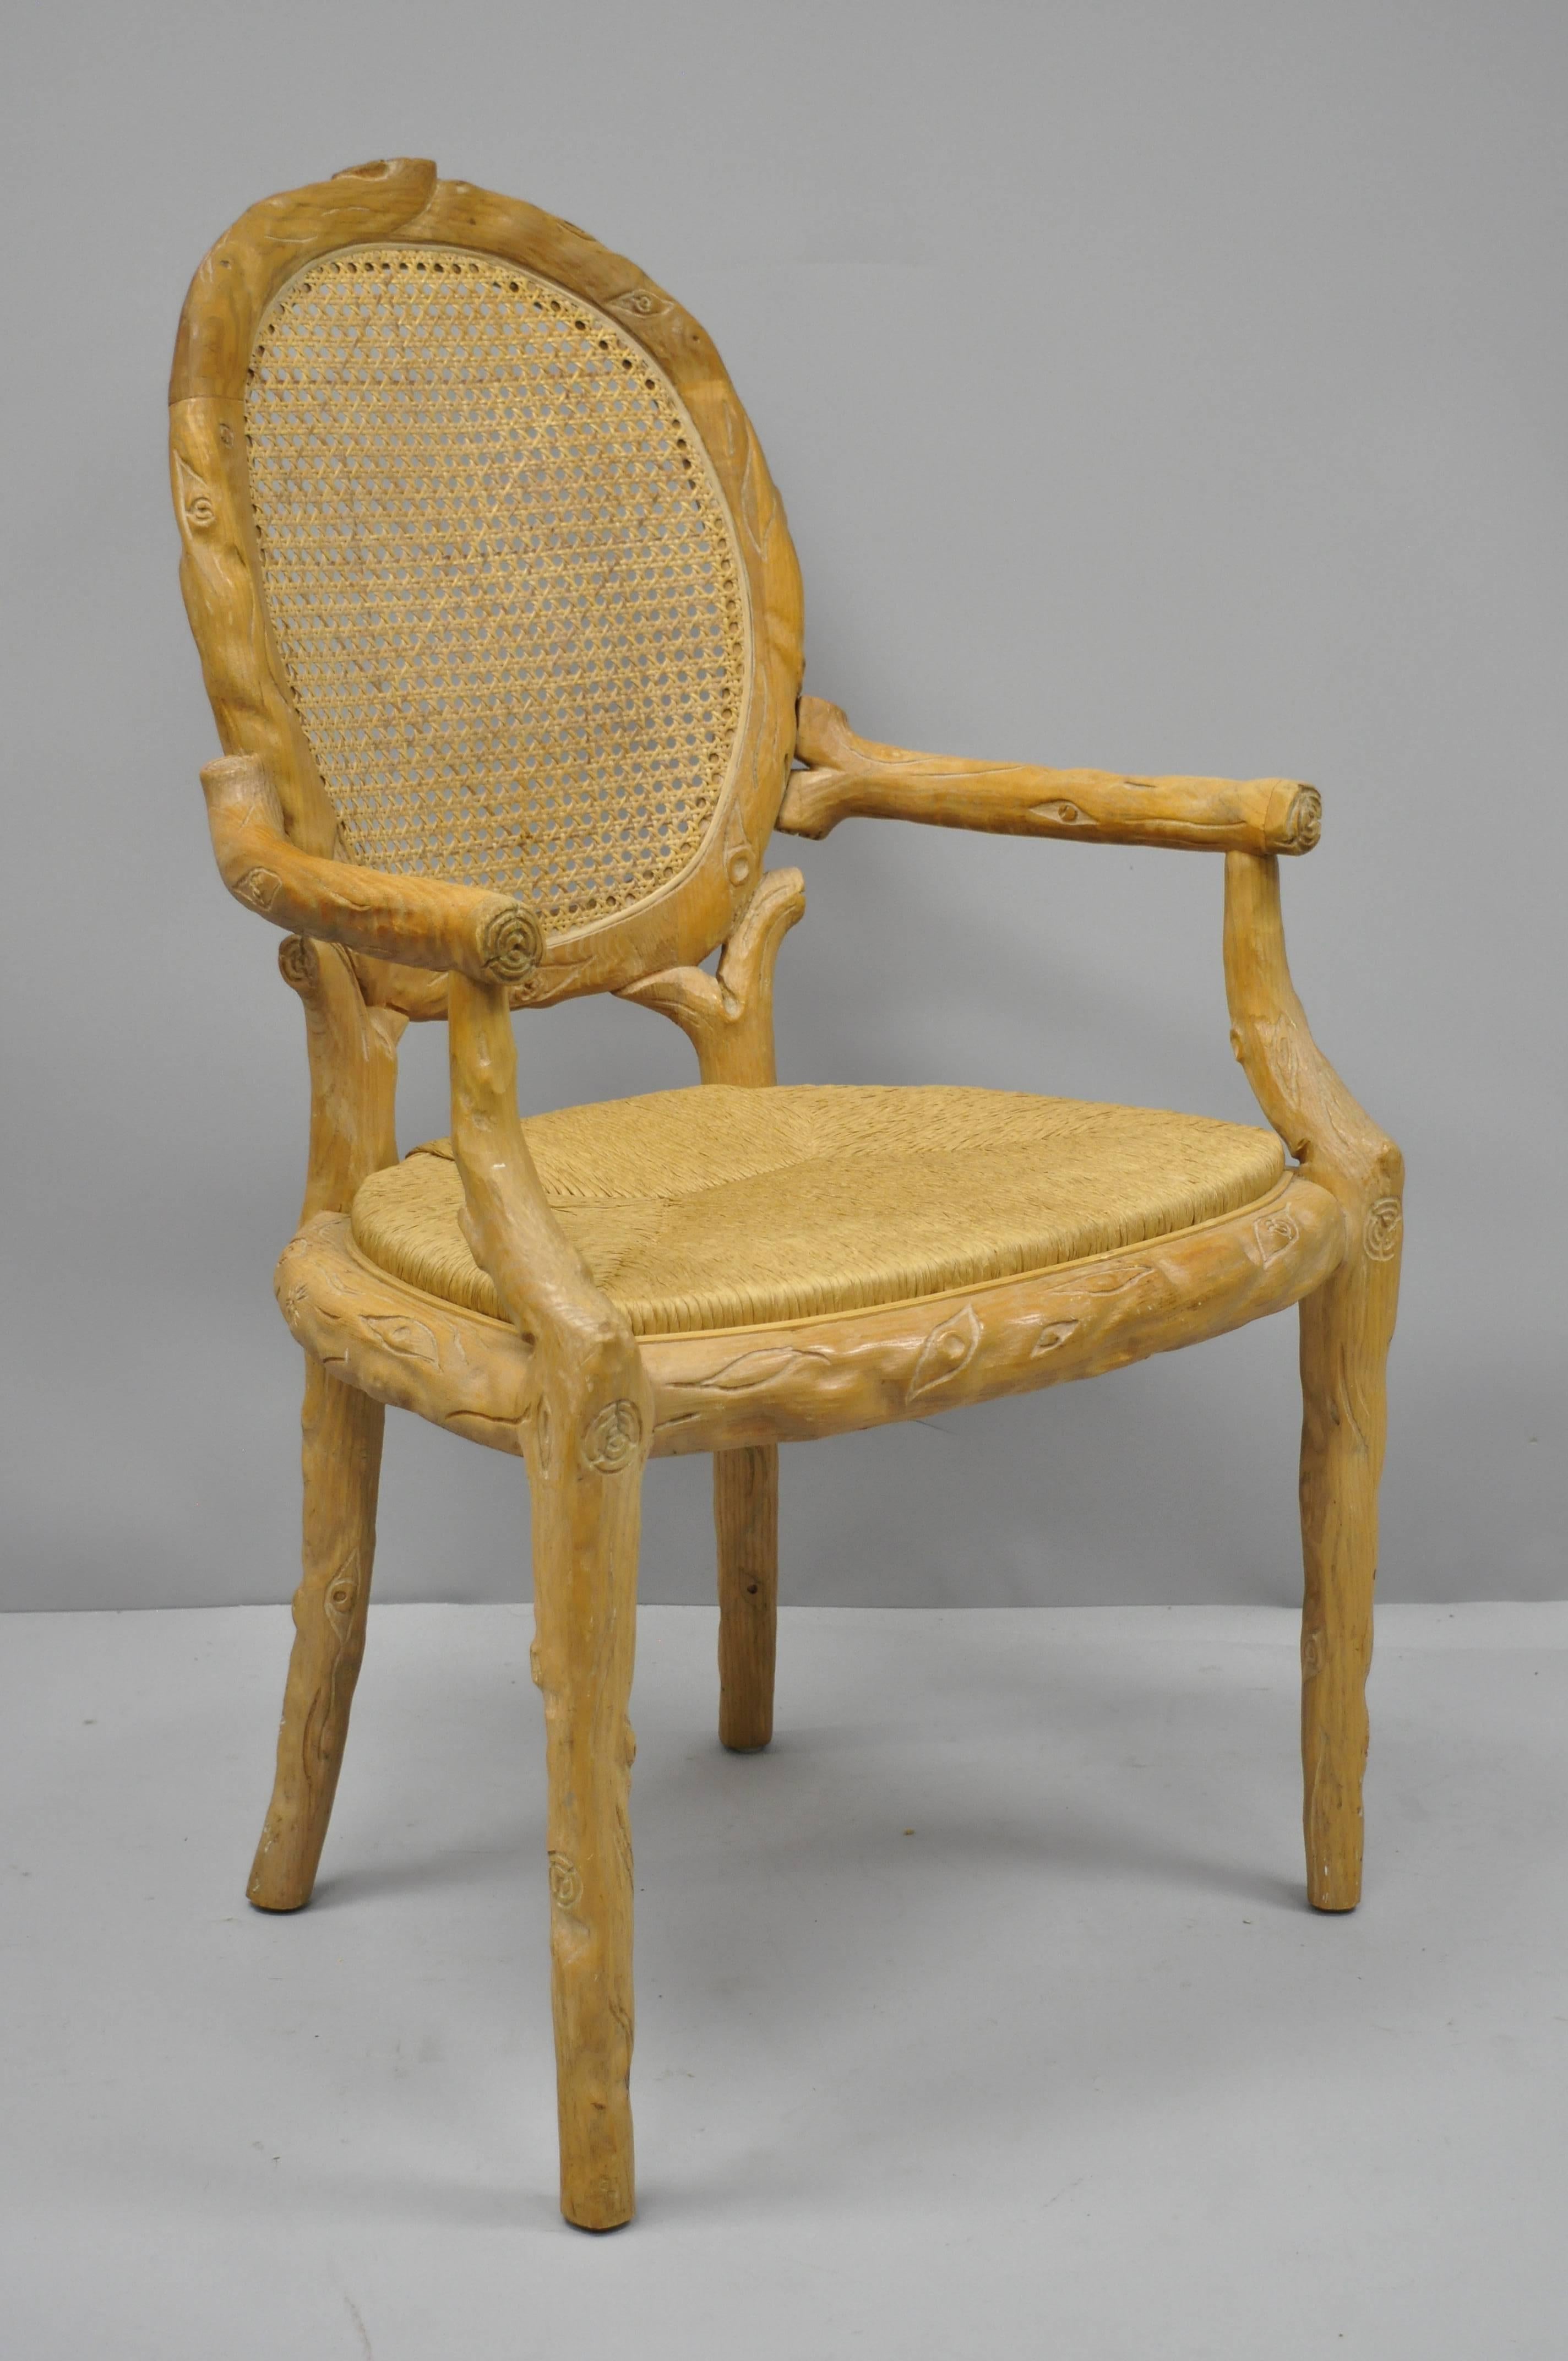 A pair of vintage faux bois rush seat dining chairs. Item features heavy solid wood construction, nicely carved details, tapered legs, oval cane backs, woven rush seats, quality American craftsmanship, circa mid-late 20th century. Measurements: 39